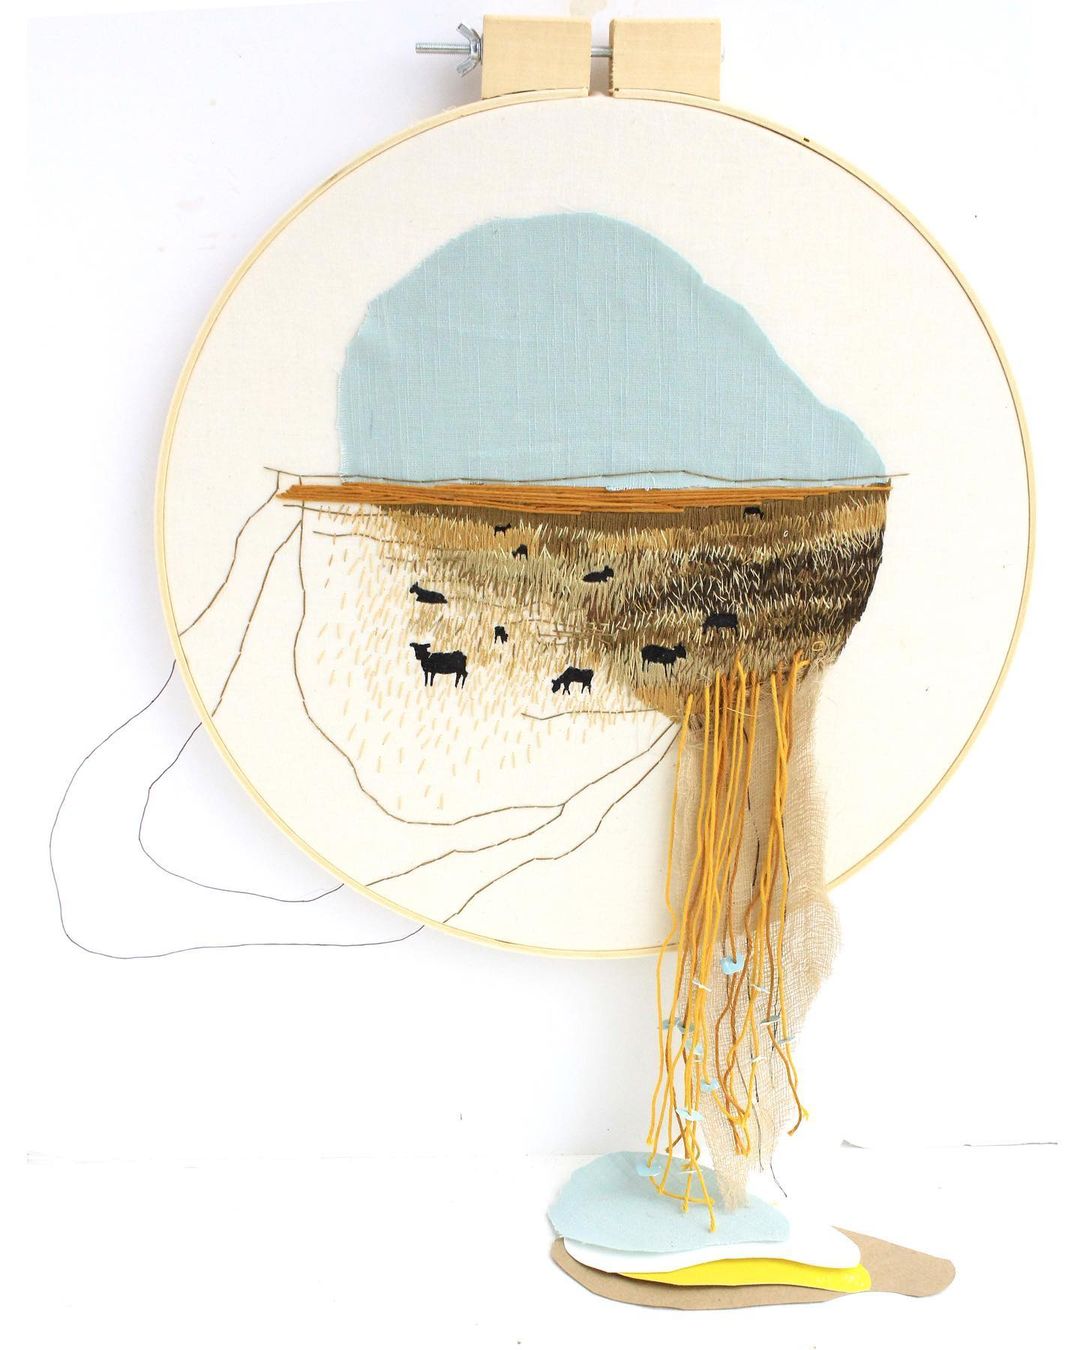 Embroidery by Anna Hultin